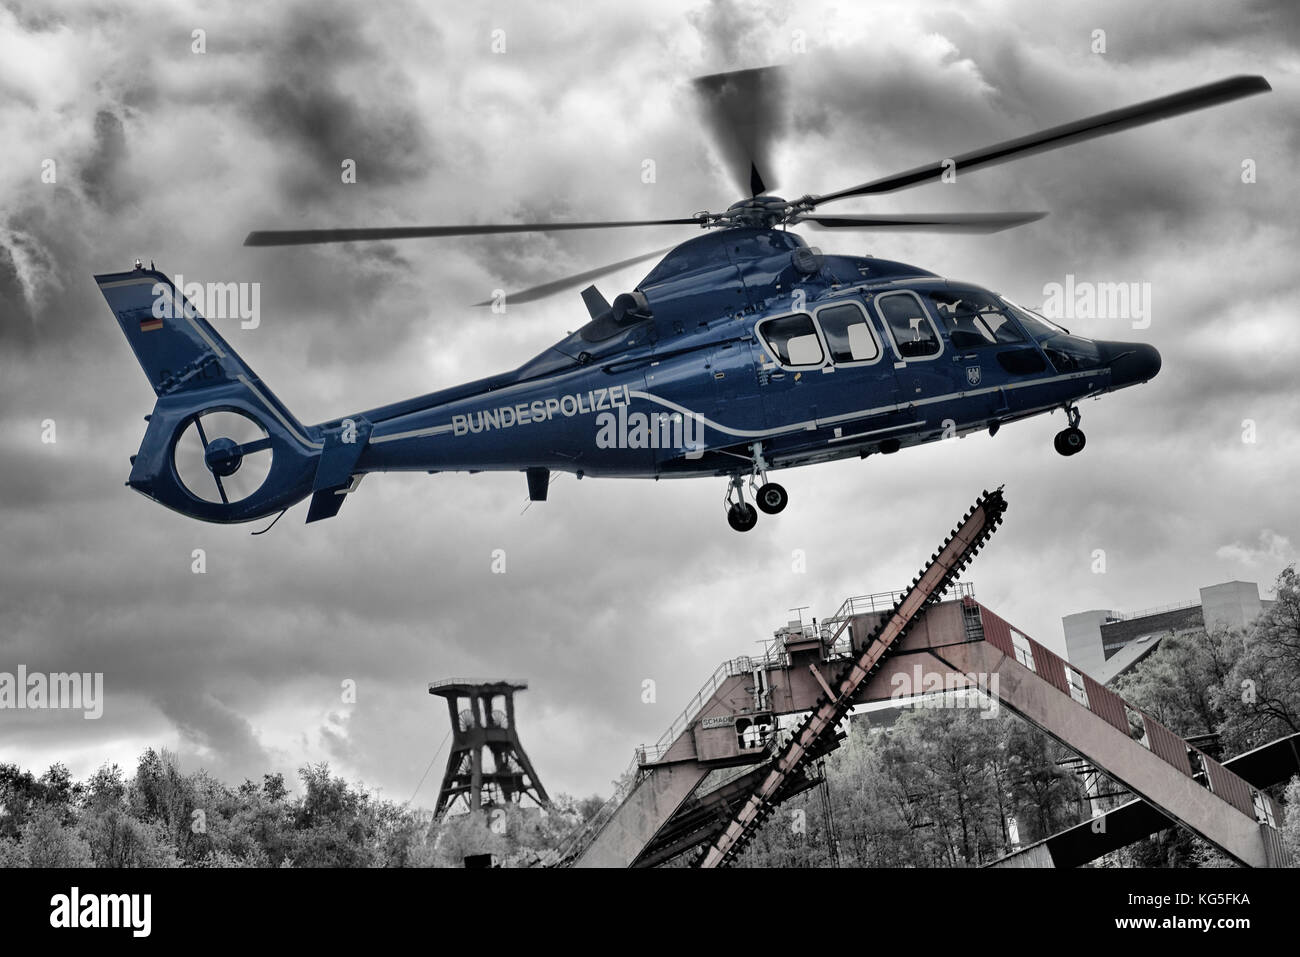 Transport helicopter EC 155 B of the federal police while take-off on Zollverein Coal Mine Industrial Complex, Essen, North Rhine-Westphalia, Germany [M] Stock Photo